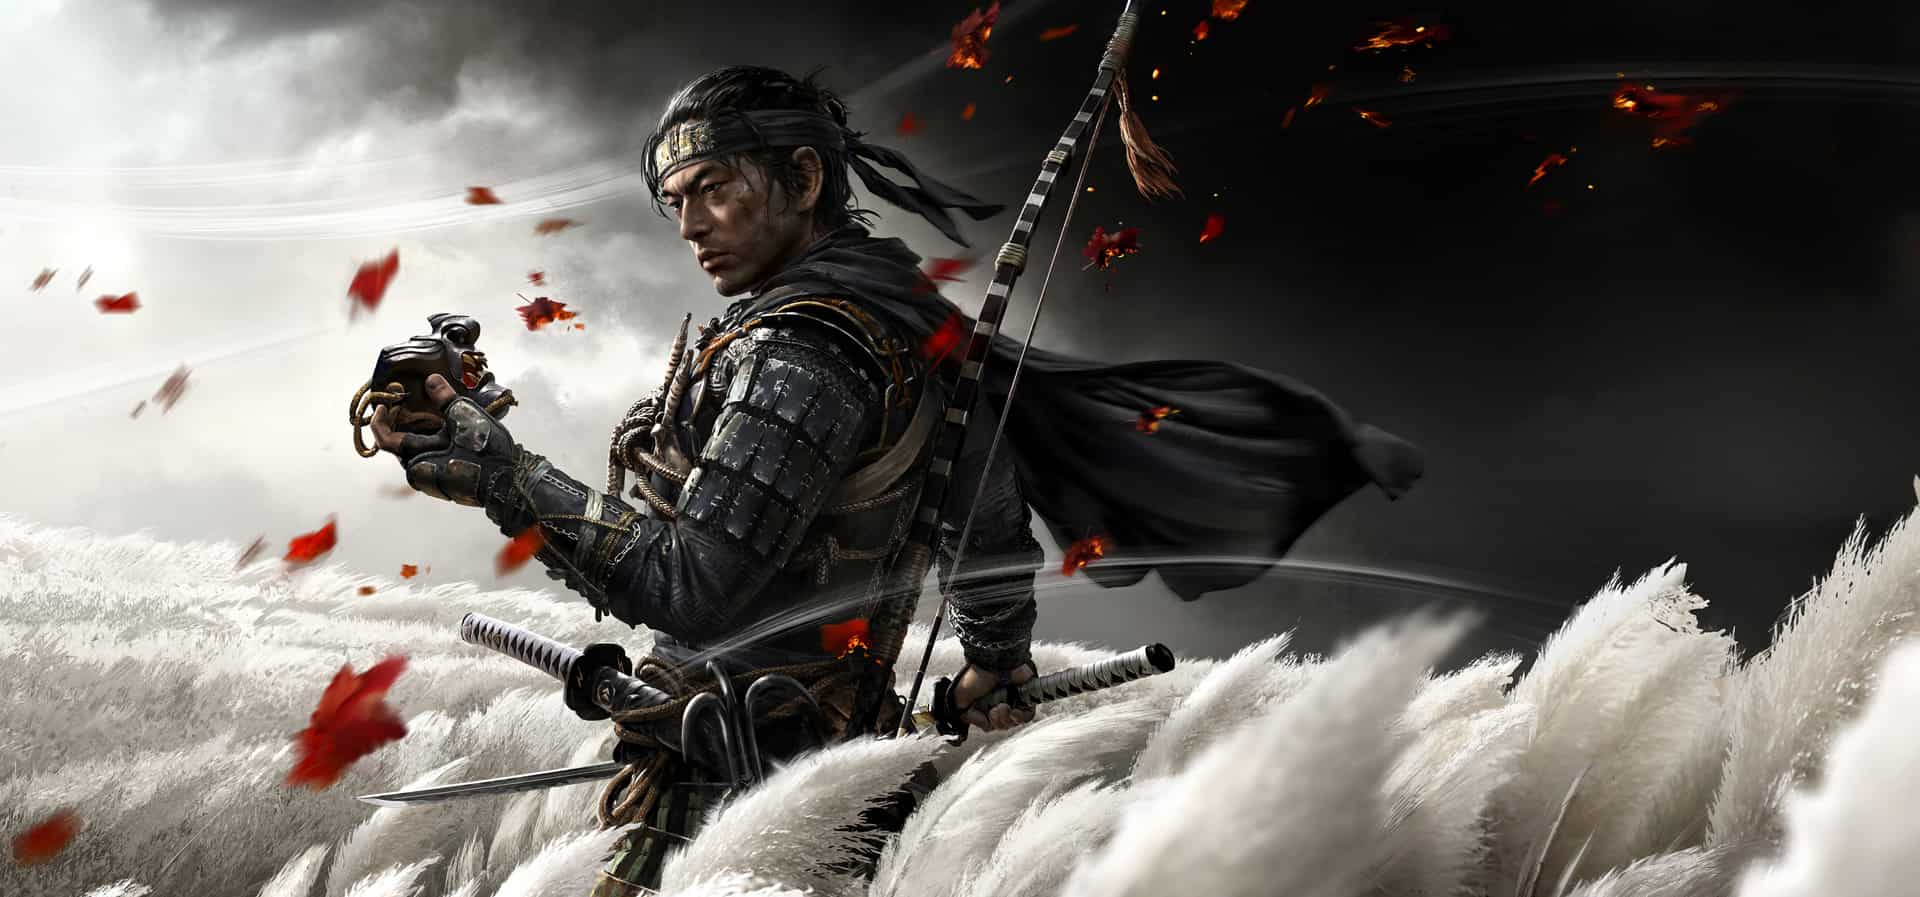  Ghost of Tsushima: PC Port Teased, Fans Excited for Steam Release